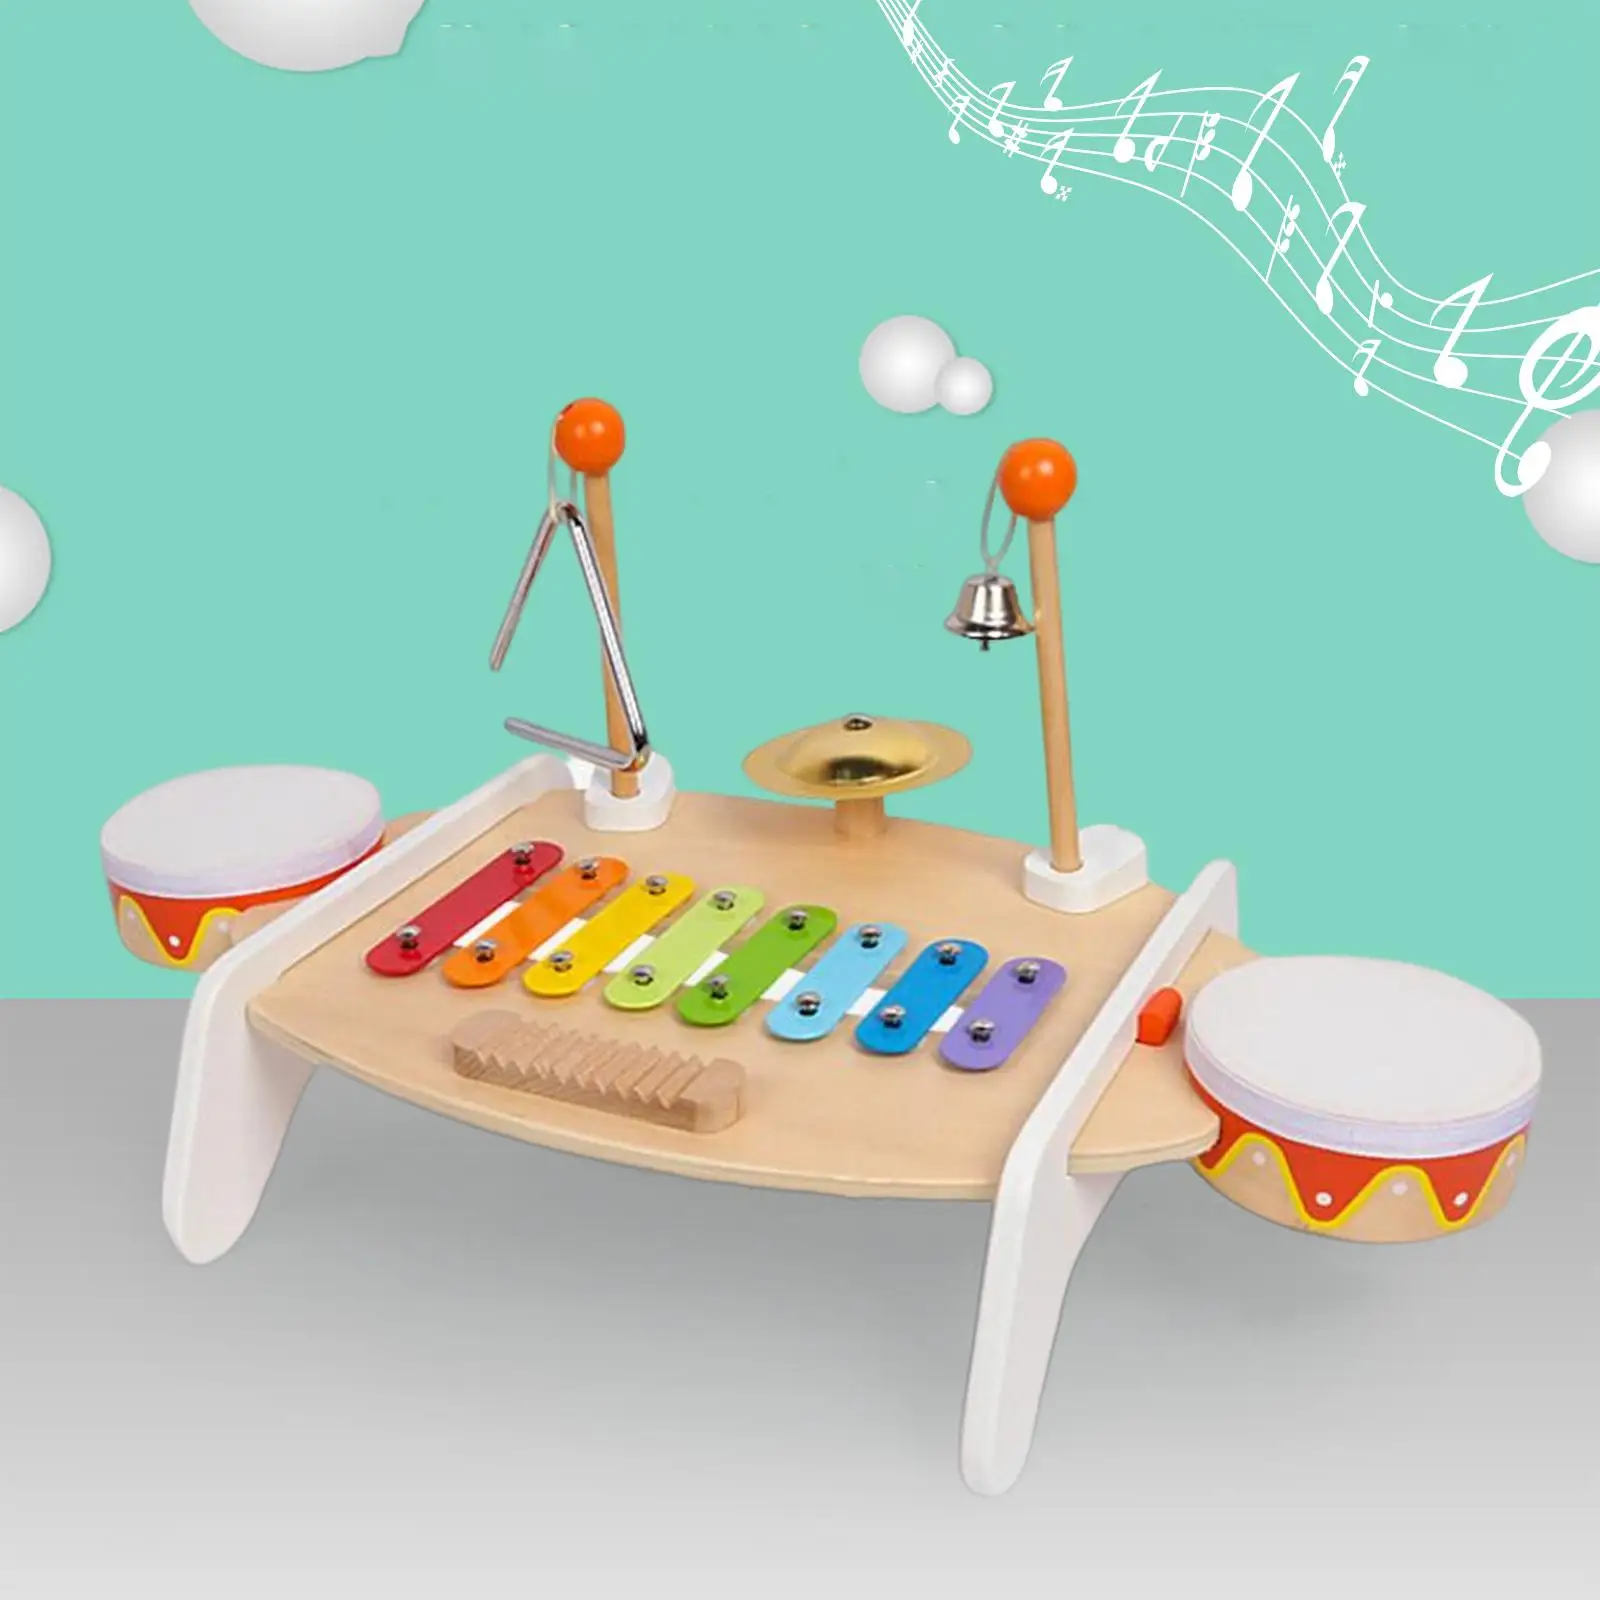 

Multifunction Xylophone Musical Toy Wooden Percussion Toy Sensory Musical Toy Musical Instruments for Boys Kids Children Gift